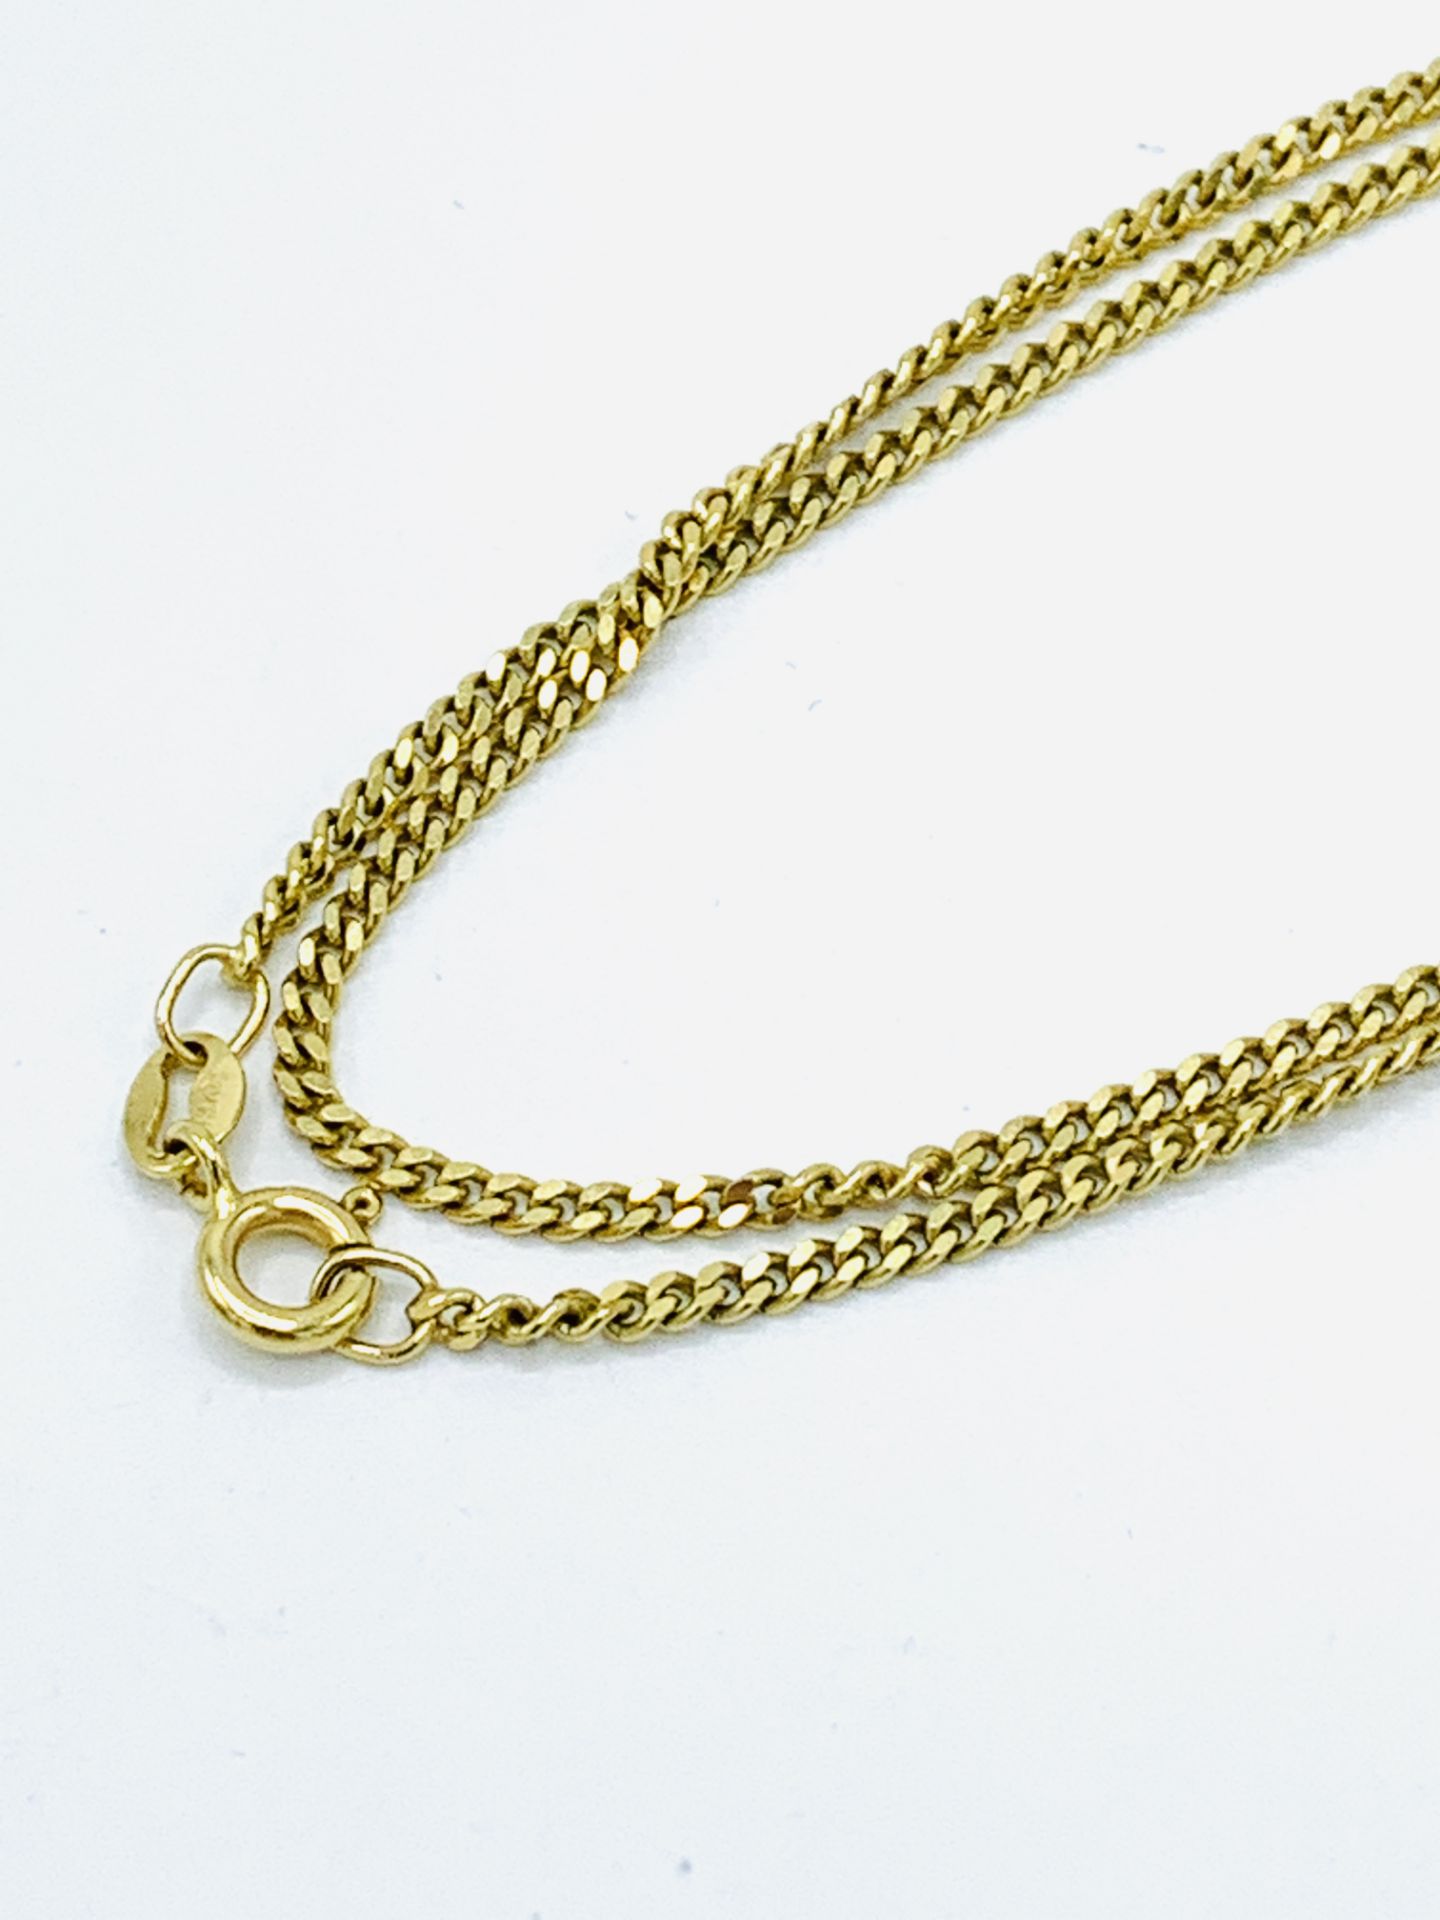 9ct gold flat chain necklace. - Image 4 of 5